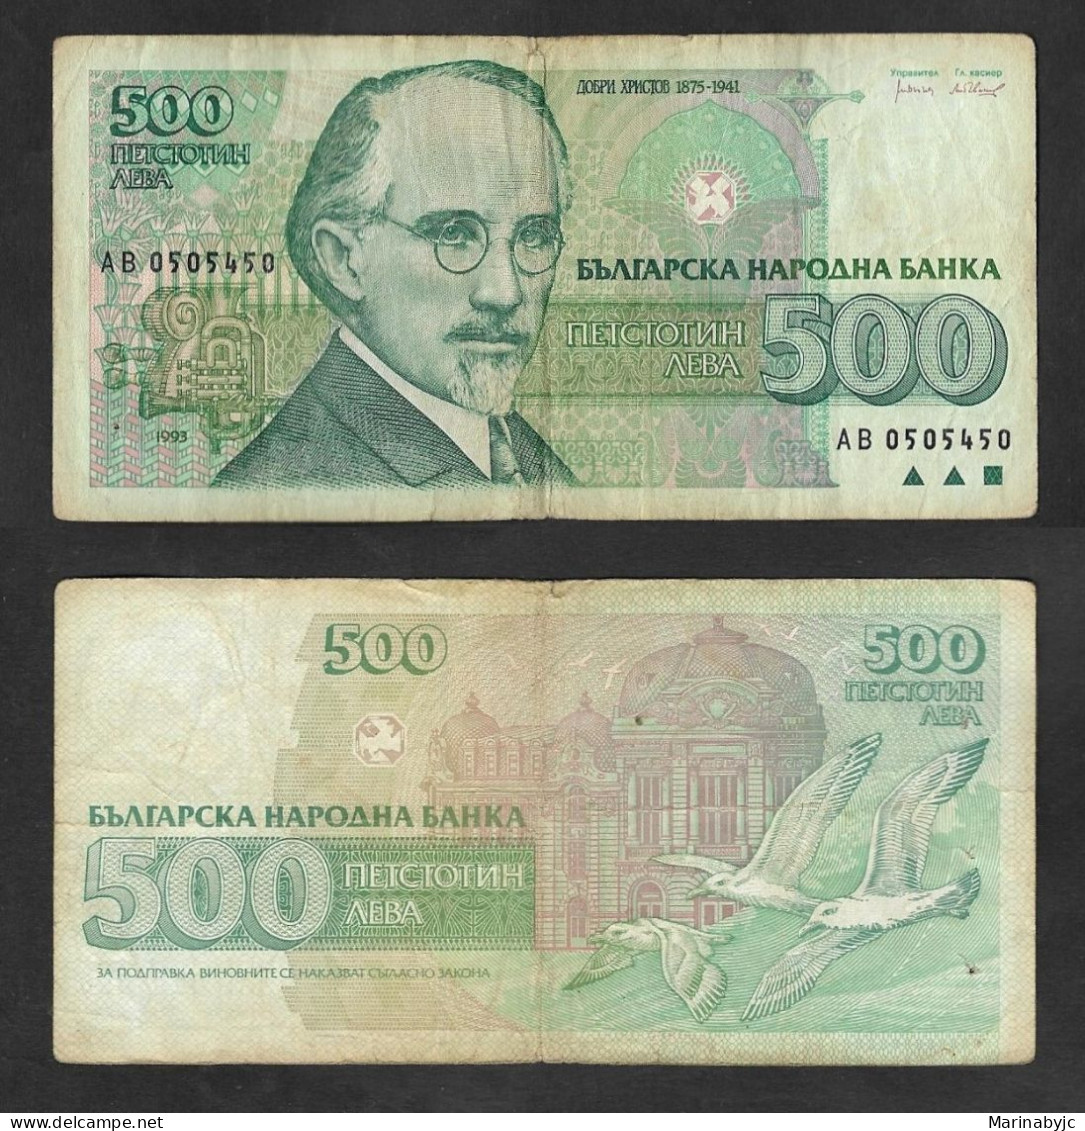 SE)1993 BULGARIA, 500 LEVA BANKNOTE OF THE CENTRAL BANK OF BULGARIA, WITH REVERSE, VF - Gebruikt